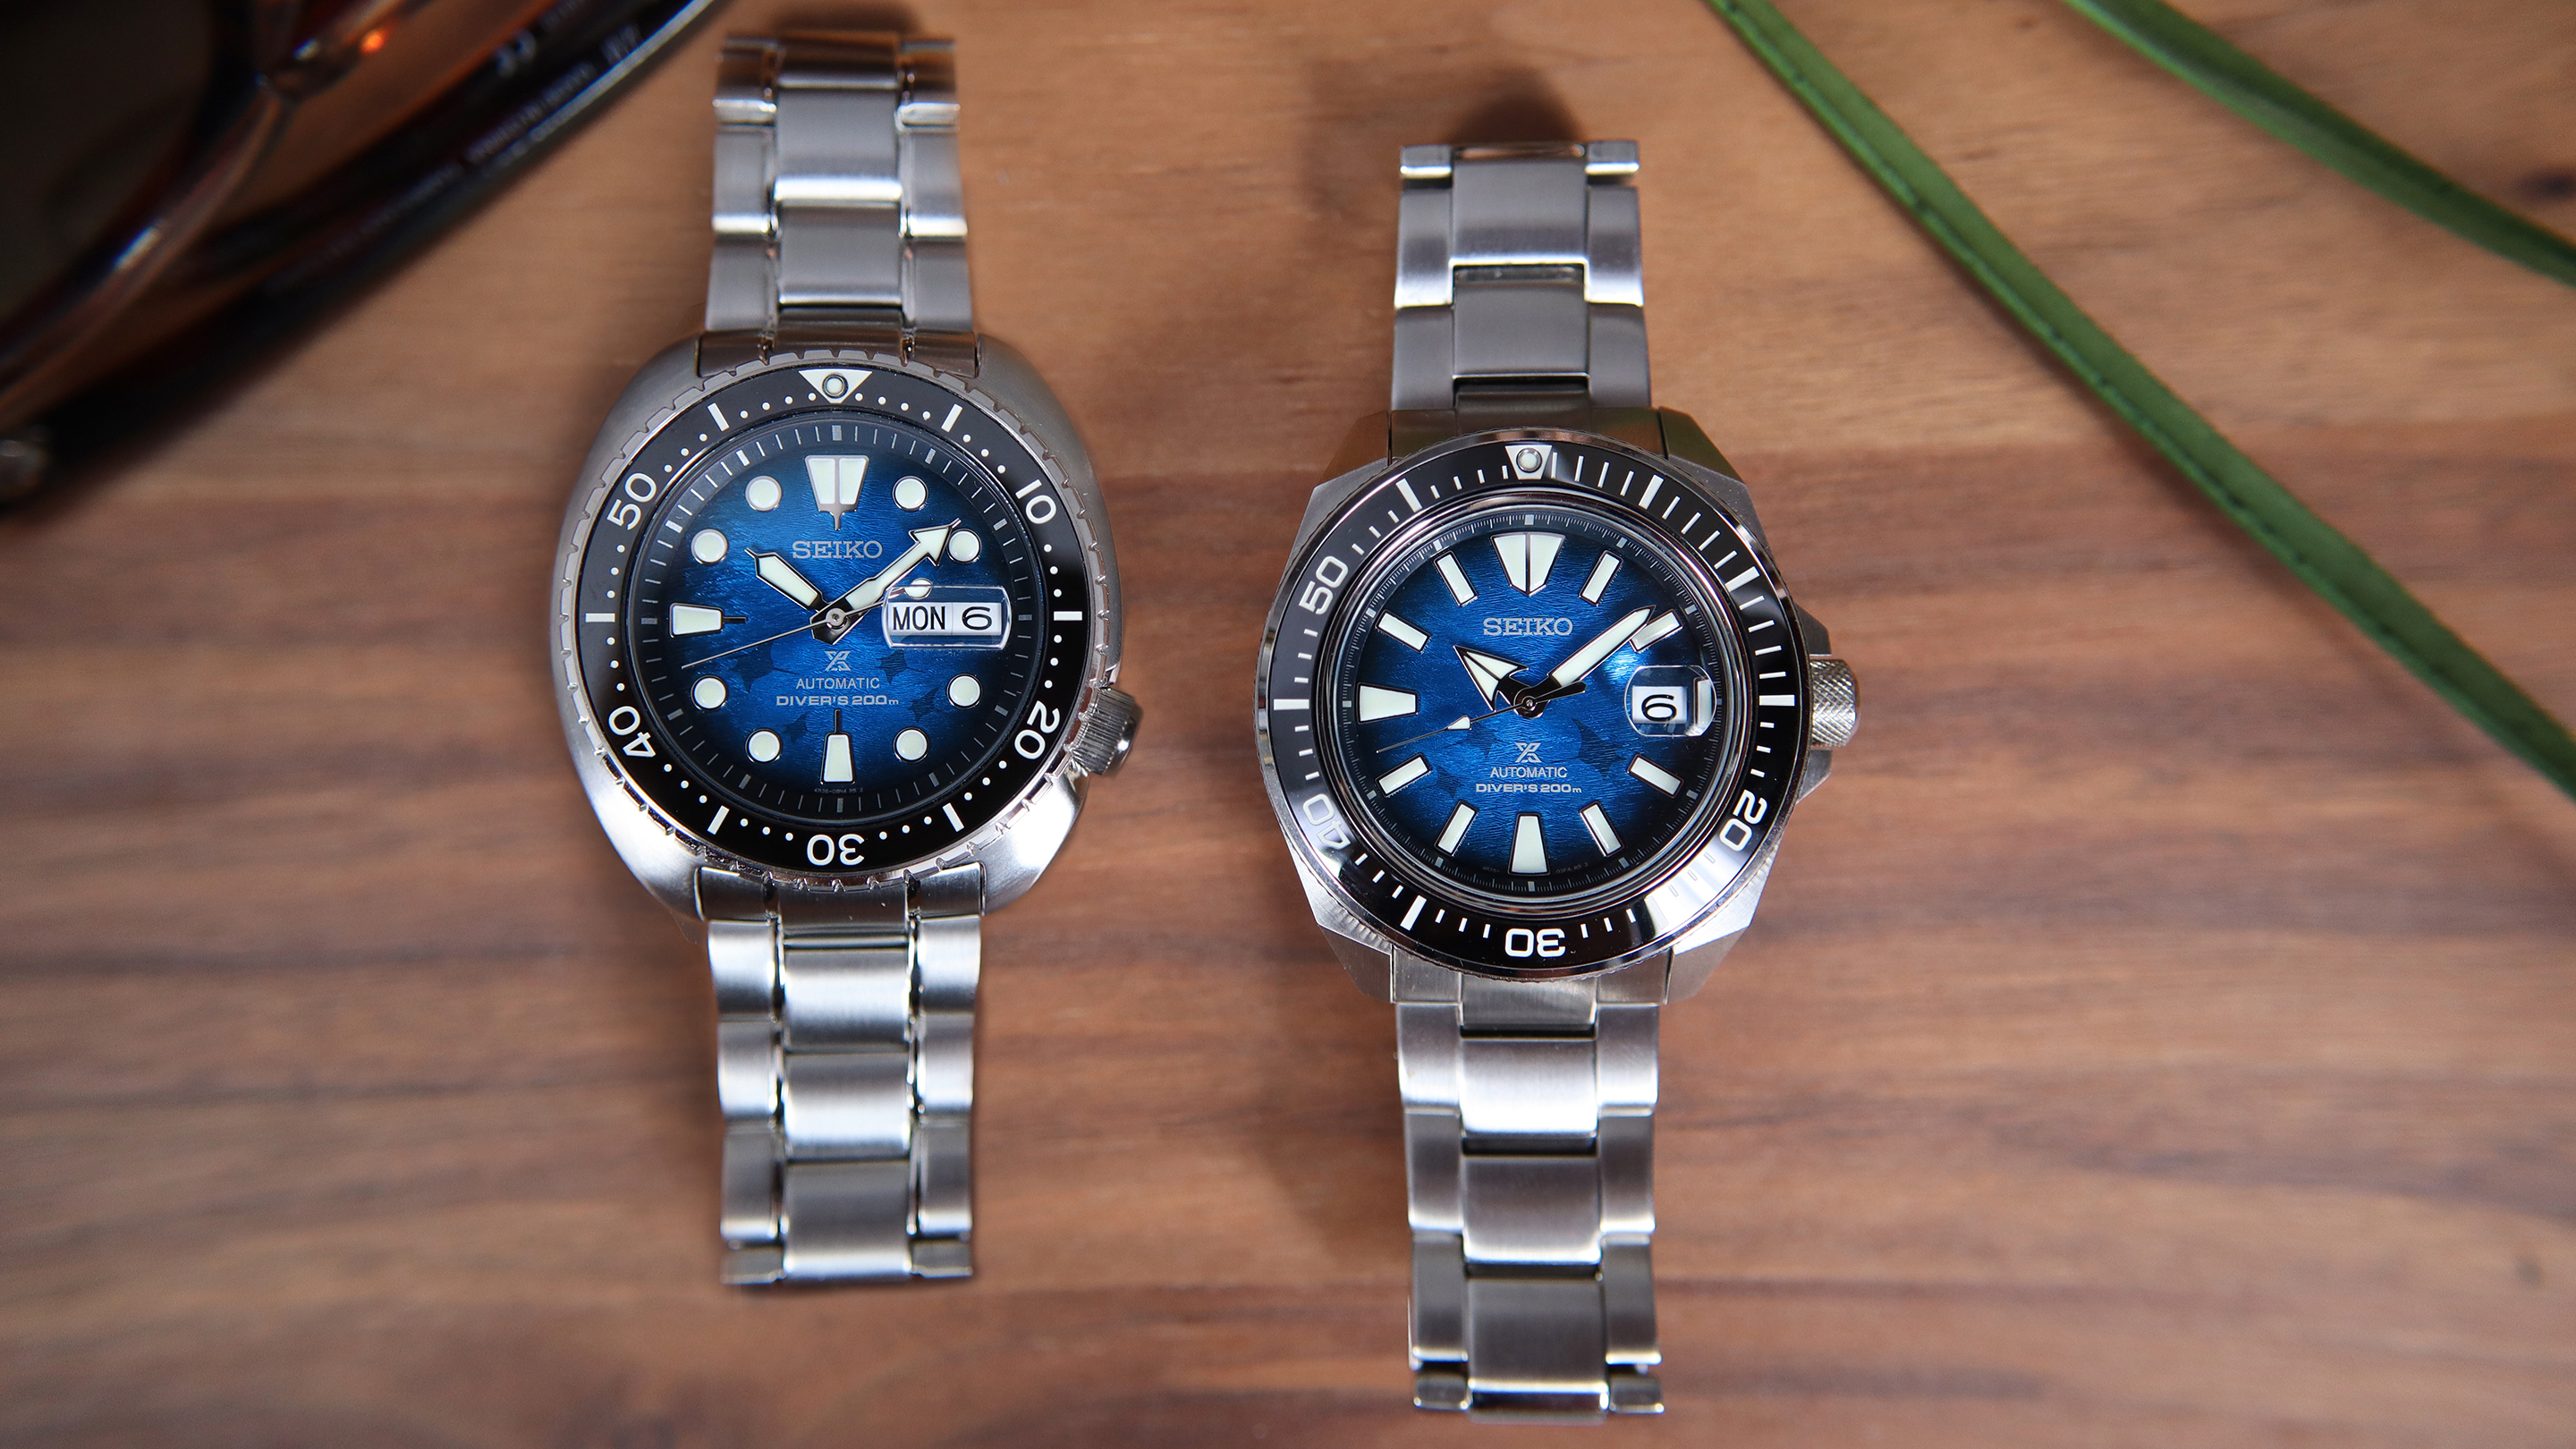 Hands-On: Two Ocean-Blue Seiko Divers With Manta Ray Dials